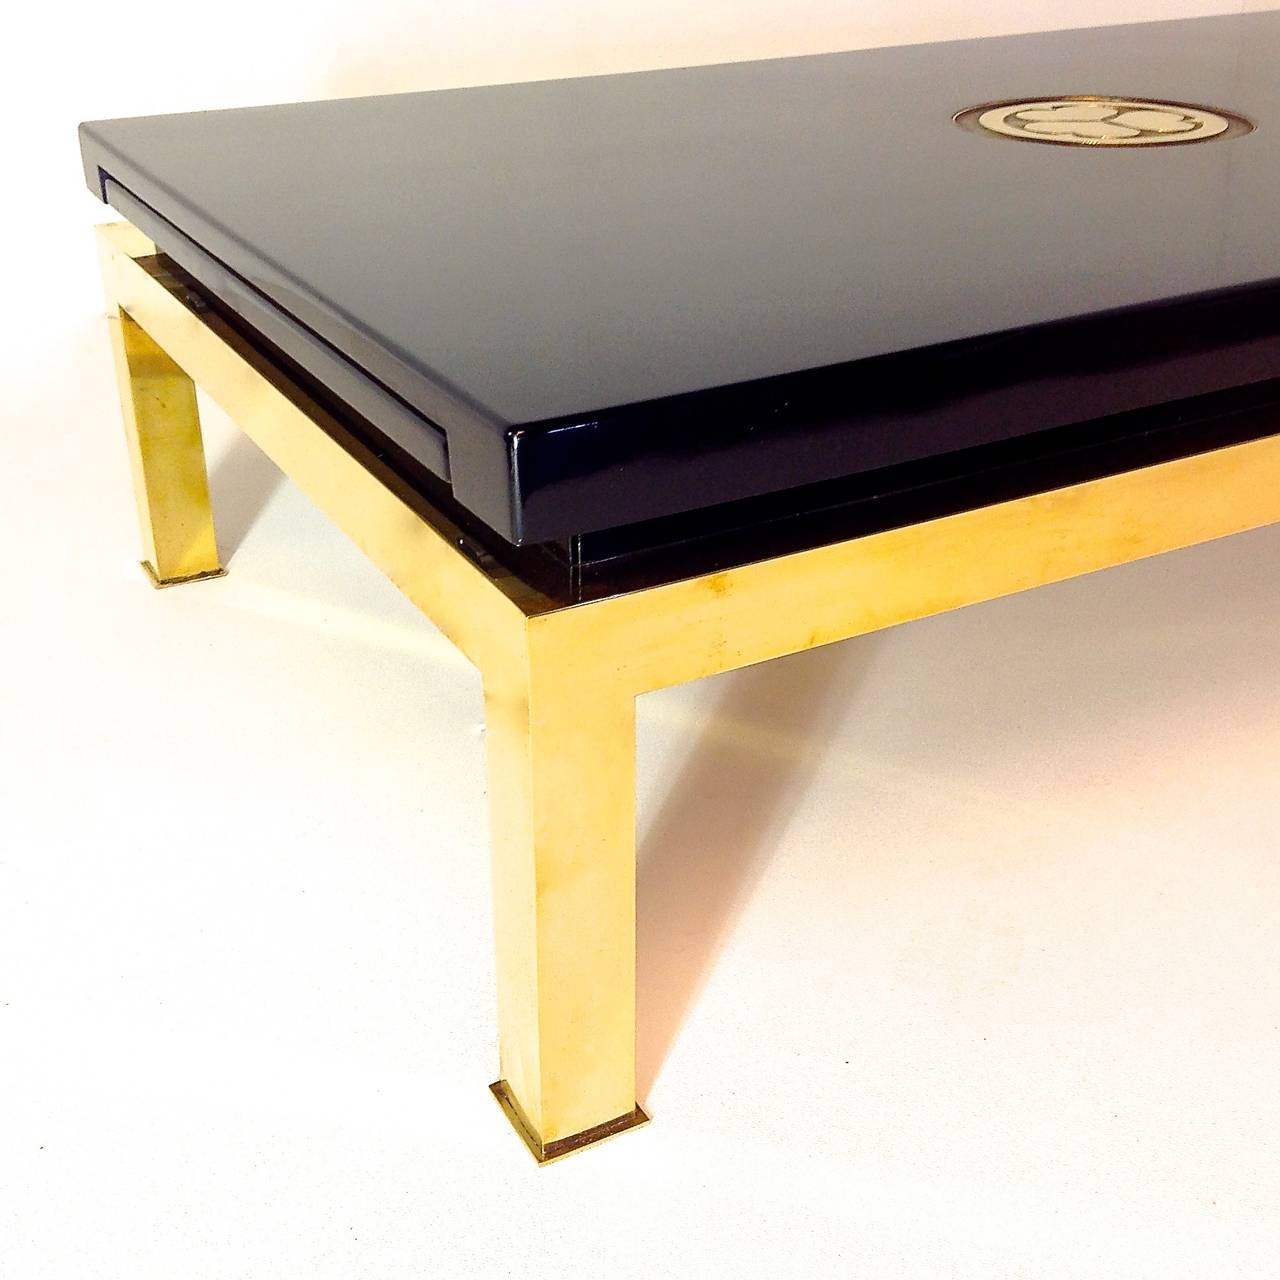 Very exclusive and elegant coffee table, by Tommaso Barbi.
Special offer, this furniture are manufactured in a small quantity.
Polished brass base with deep black lacquered wood.
Brass plate insert in the tabletop, inspired by Japanese mon, could